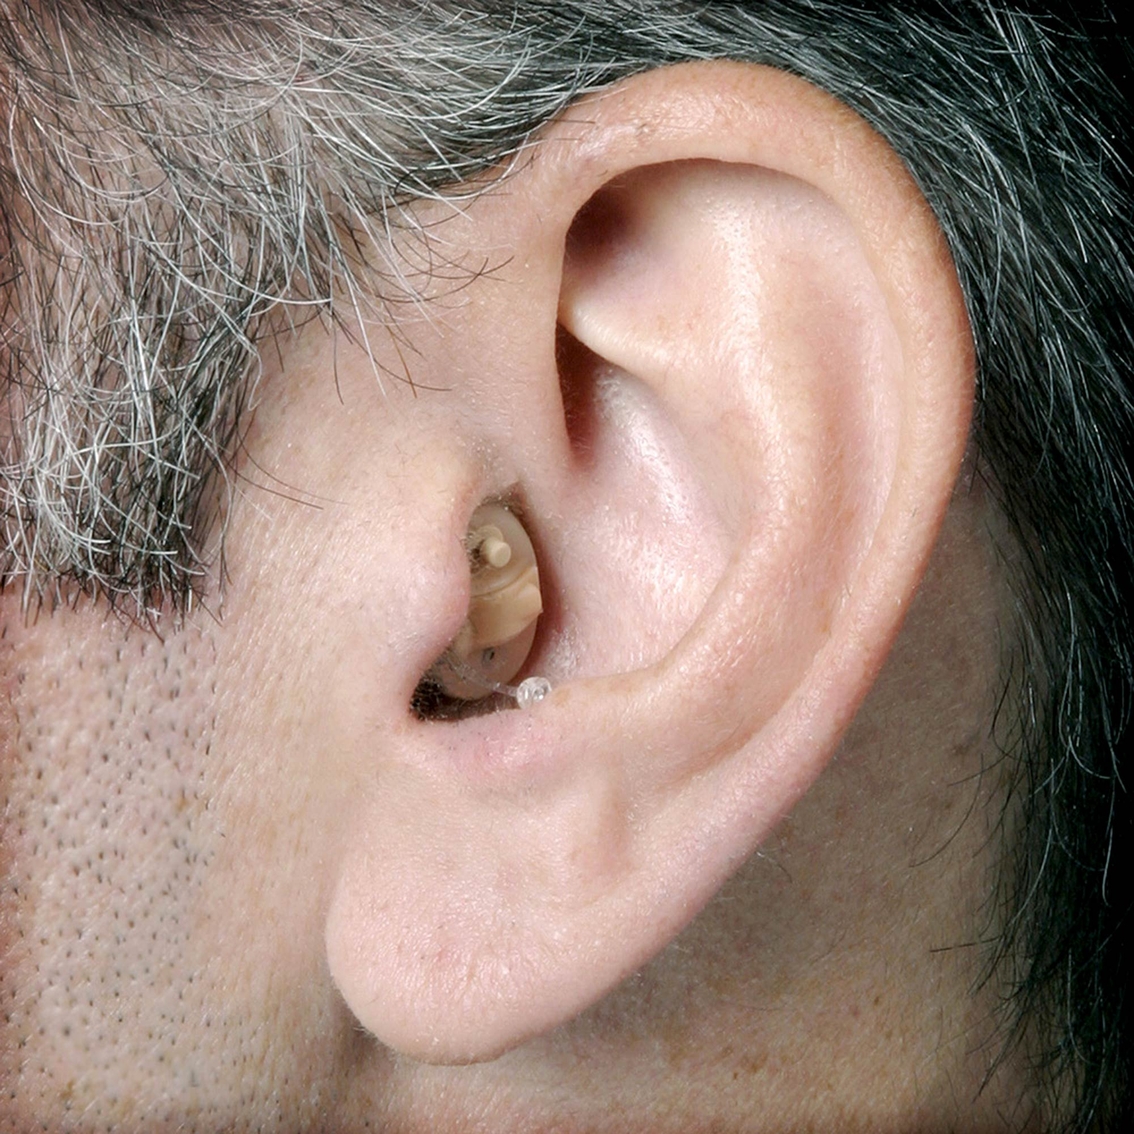 General Hearing Instruments SimplySoft Smart Touch Digital Left Ear Hearing Aid - Image 3 of 4